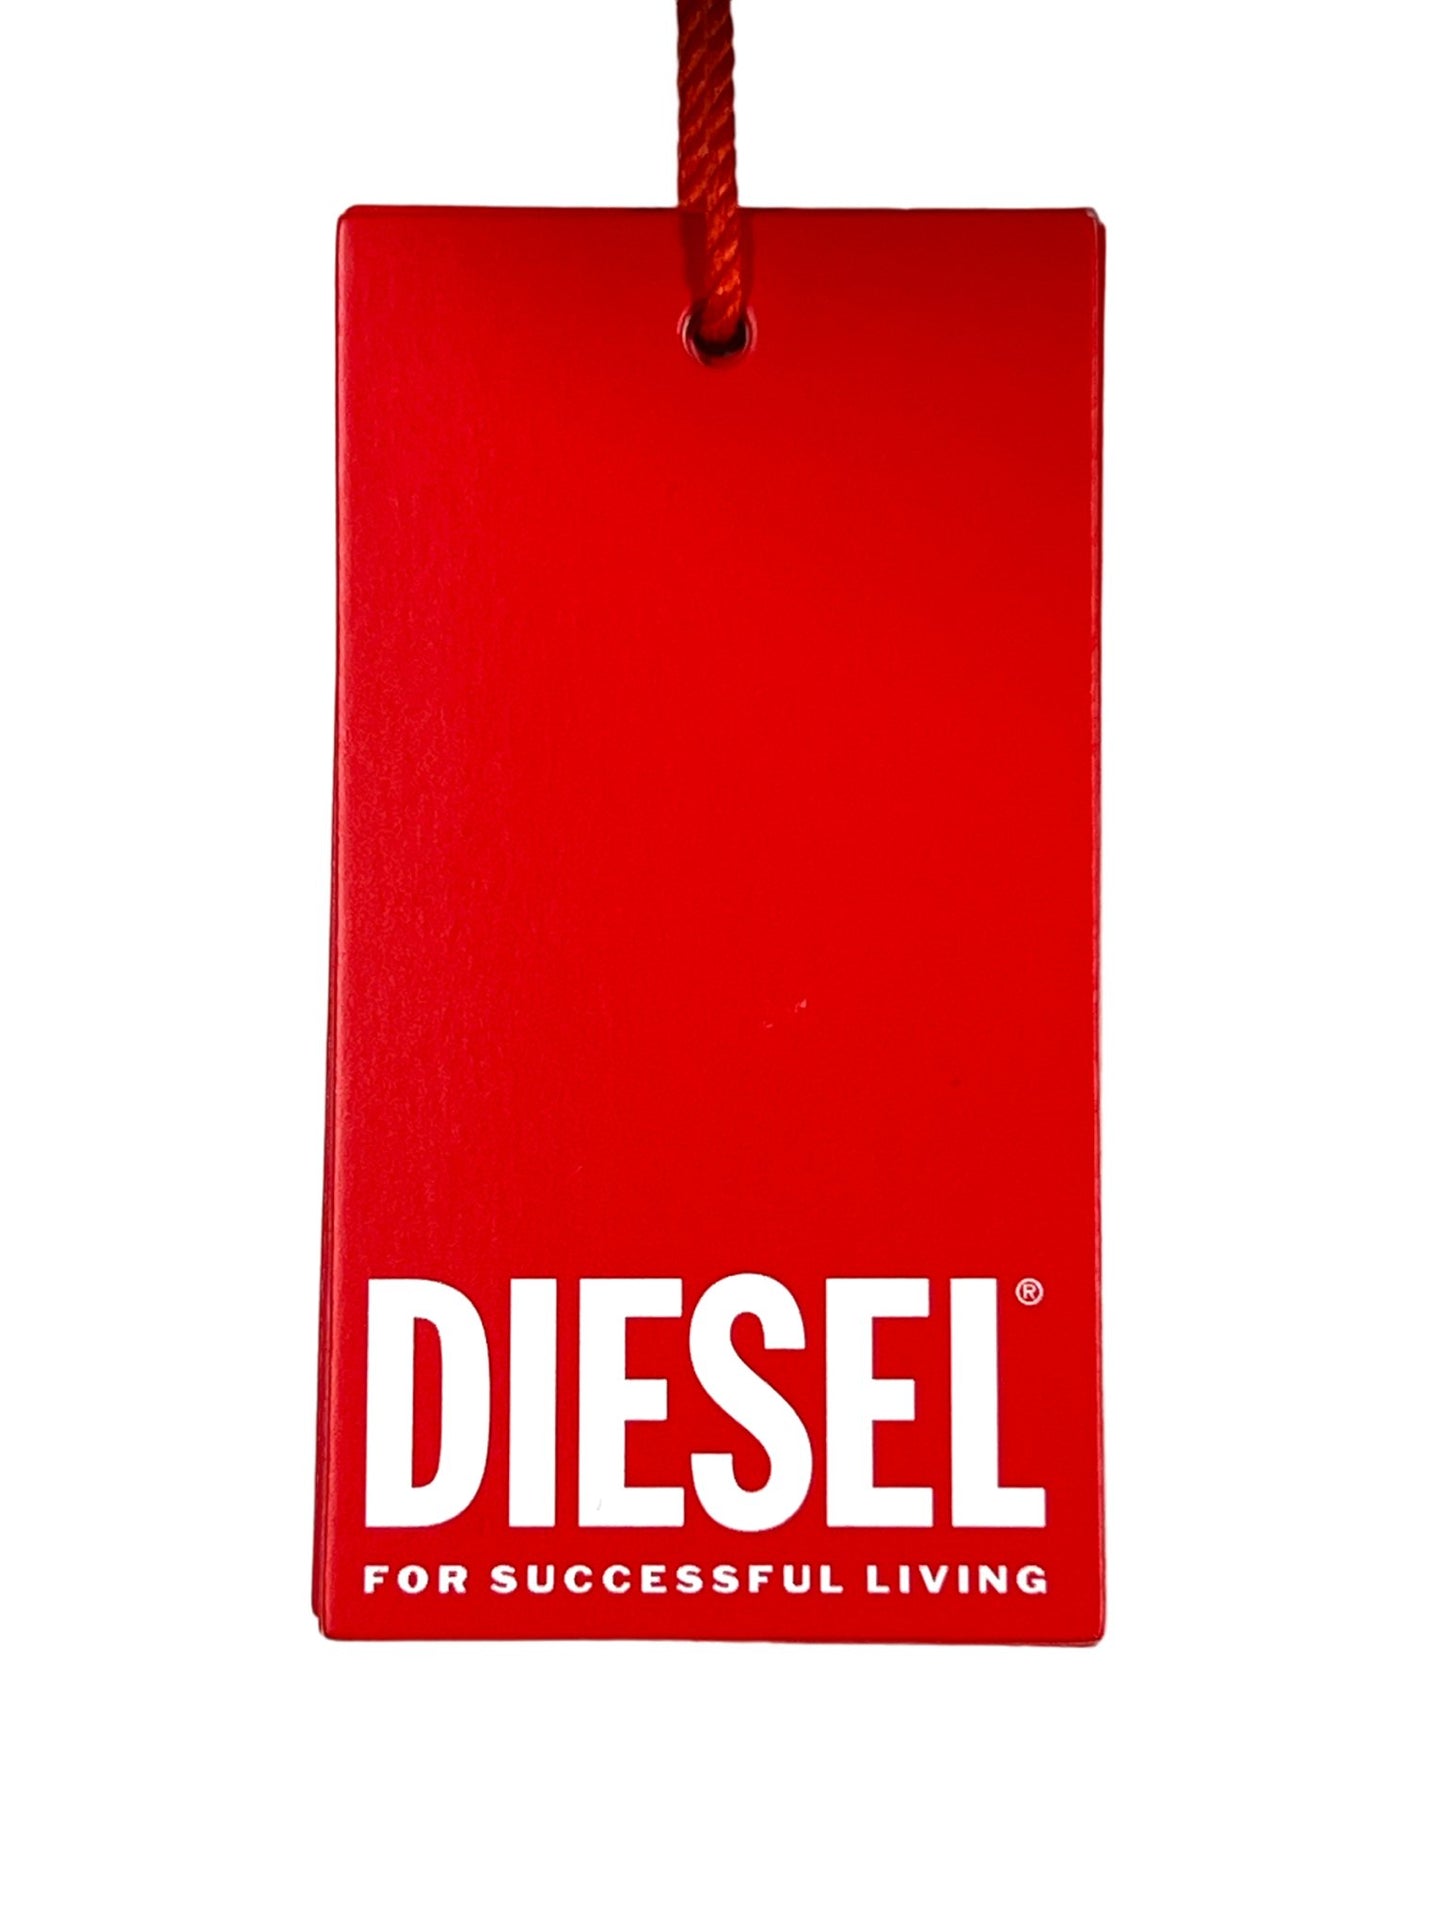 A red DIESEL 2019 D-STRUKT 68JF jeans brand tag with the slogan "for successful living" against a white background.